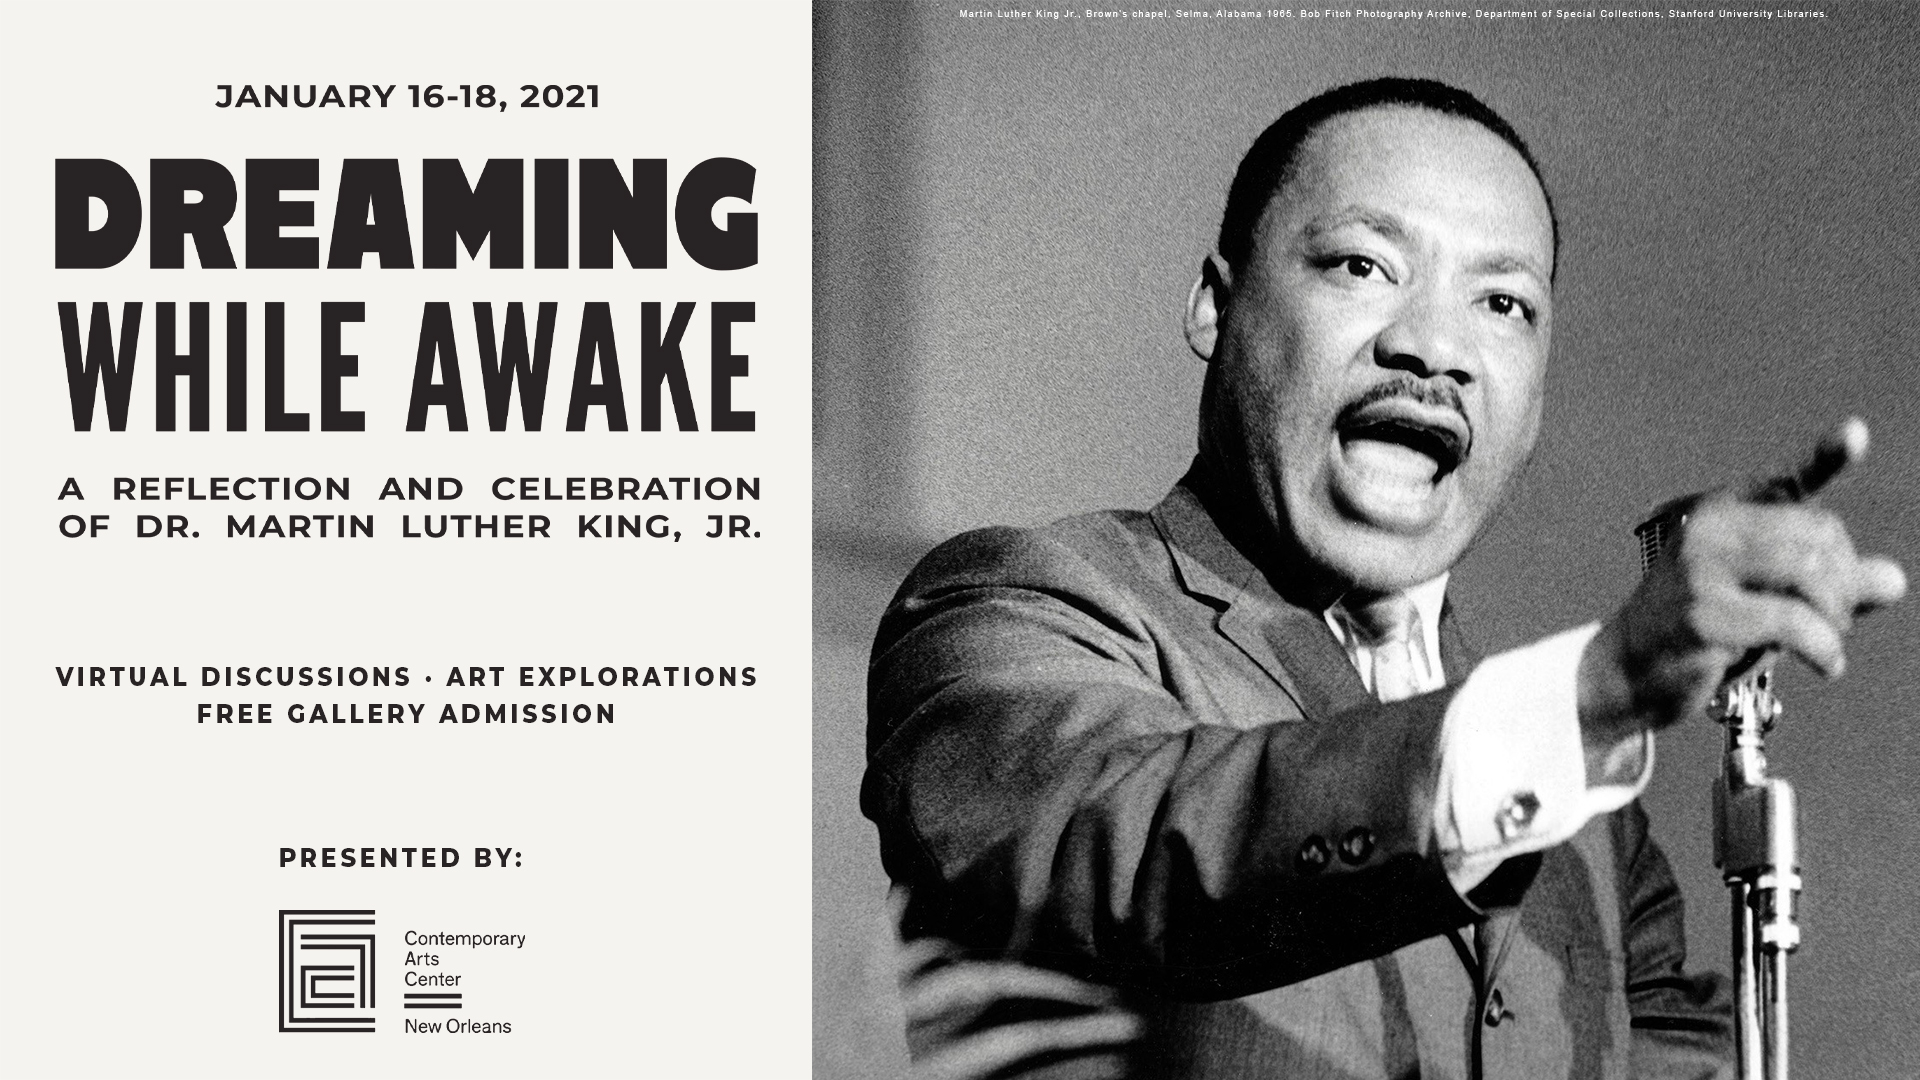 CAC Announces "Dreaming While Awake," A Celebration of Dr. Martin Luther King Jr. Featuring Artists and Young Leaders Exploring Art and Democracy in a Time of Social Activism